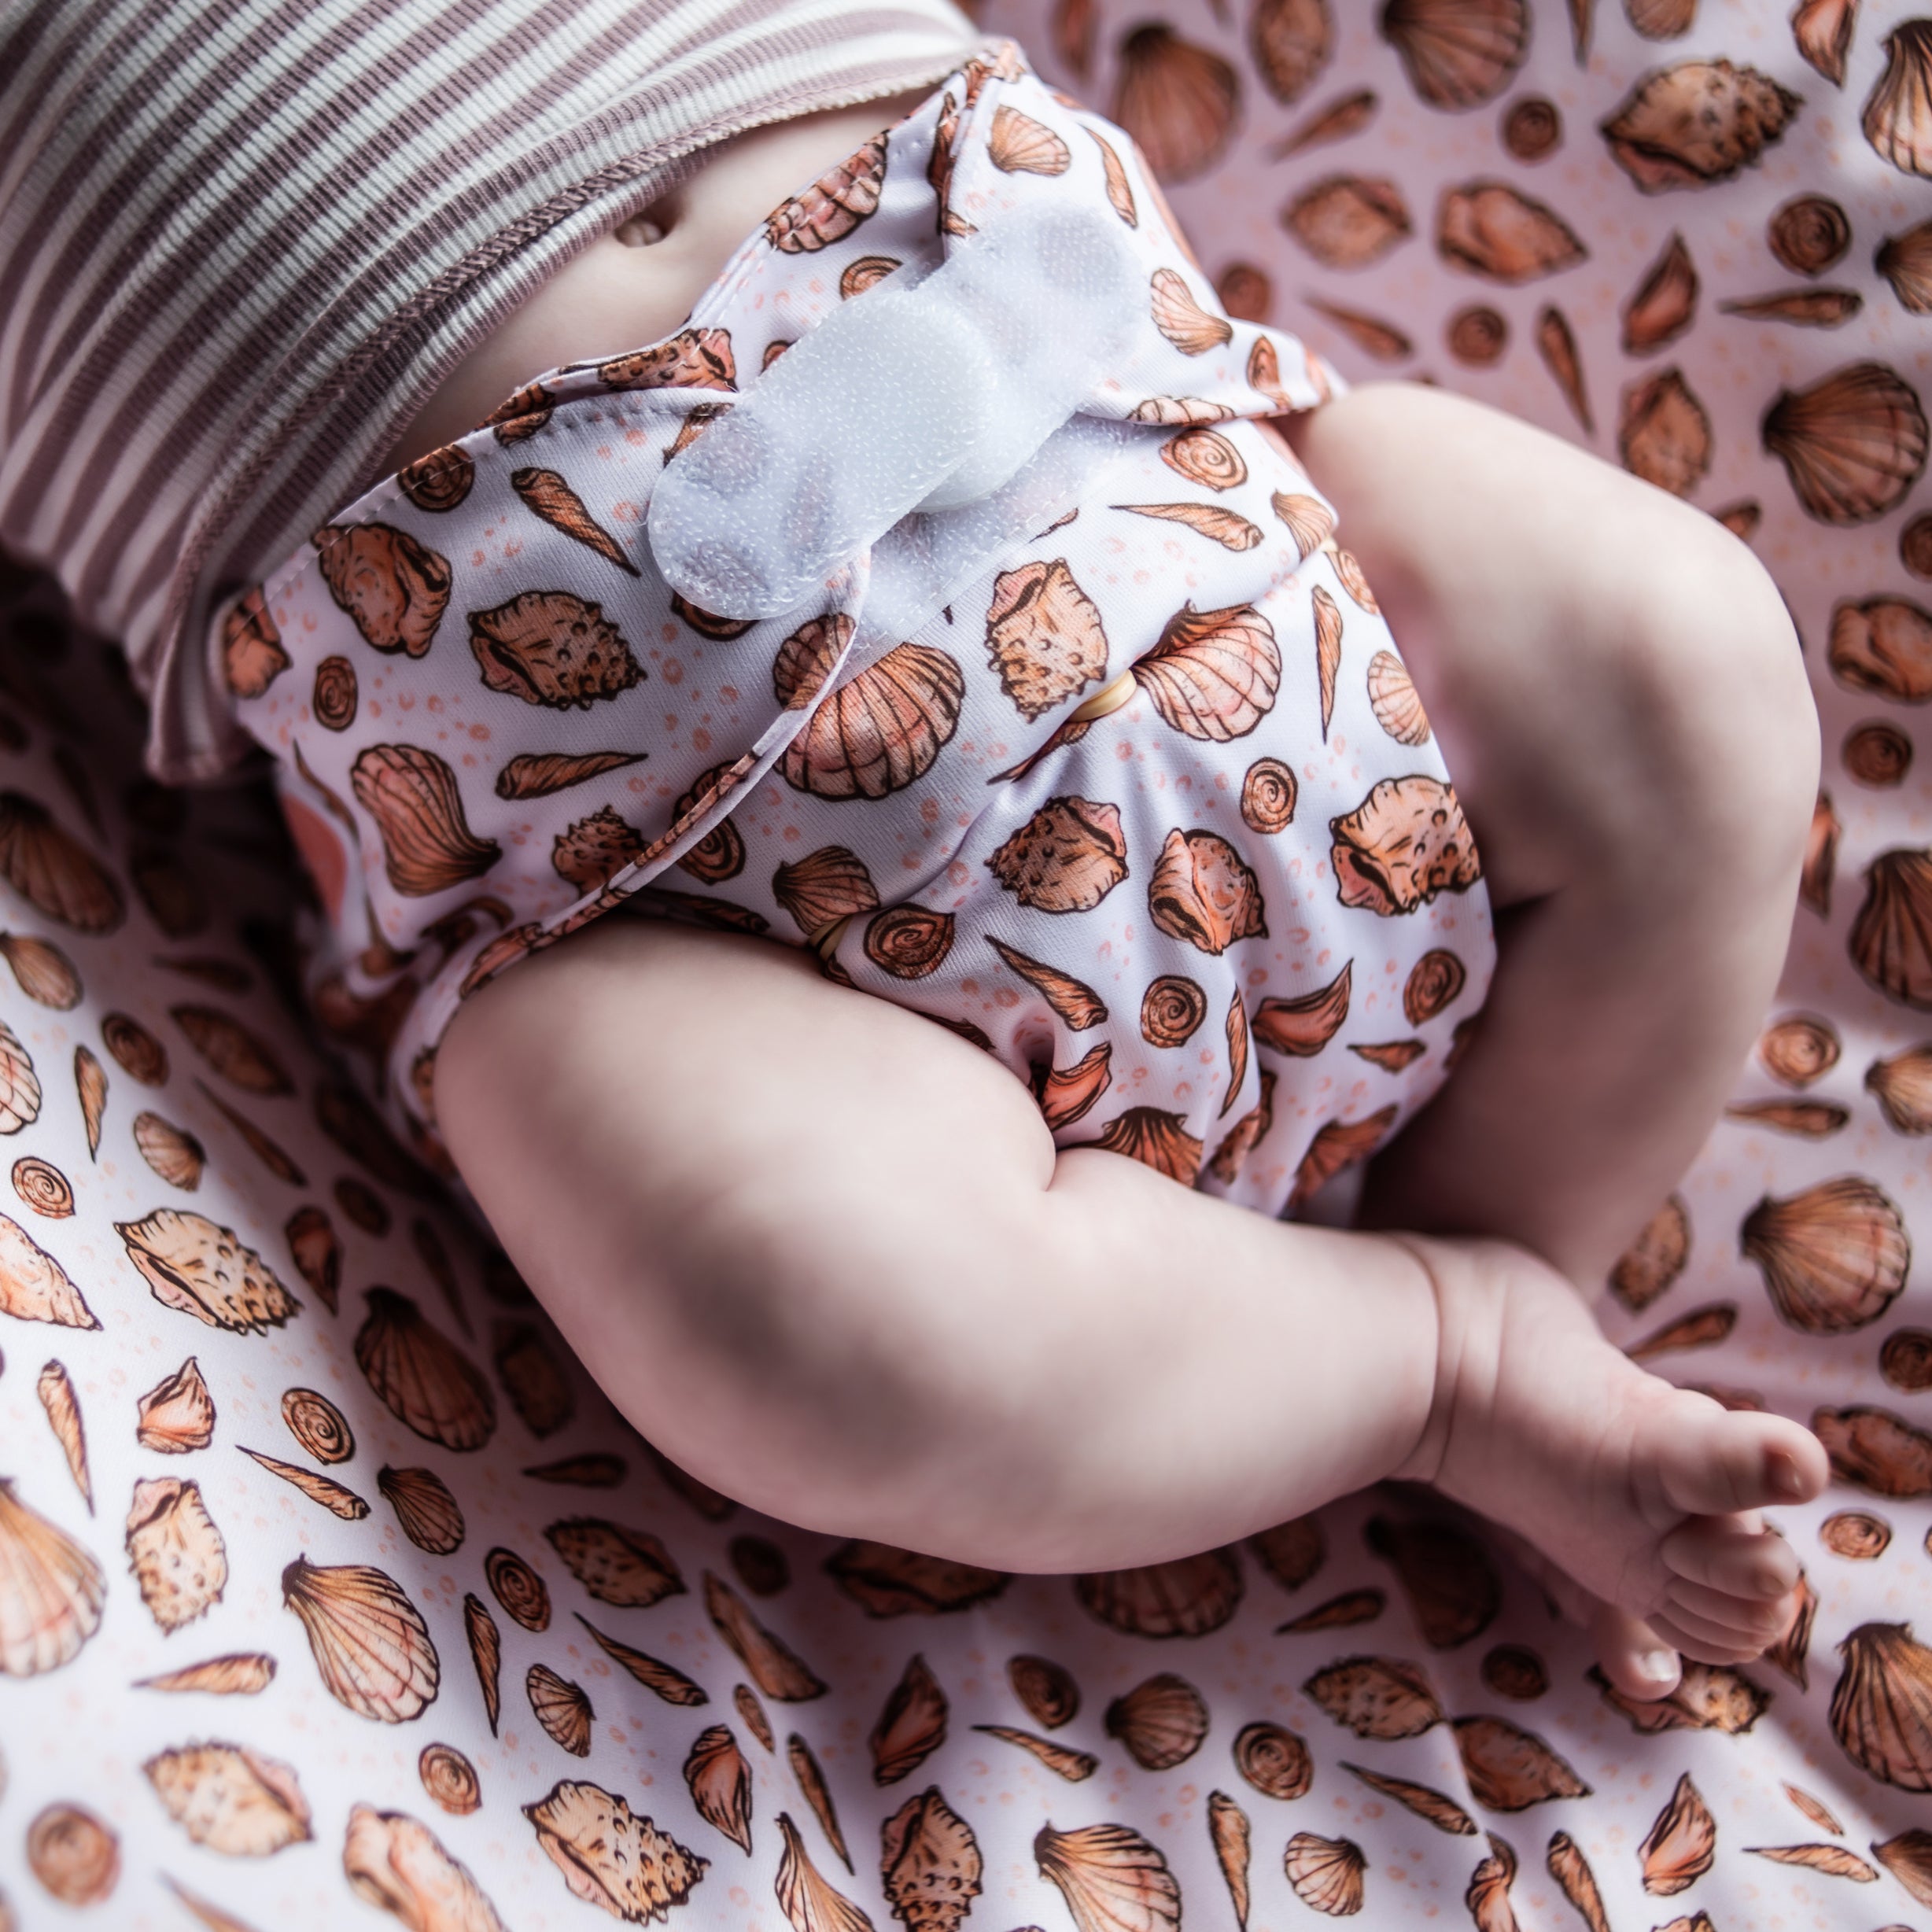 Ultimate Wipeable Cloth Nappy | What the Shell (Nap Edition) - Monarch